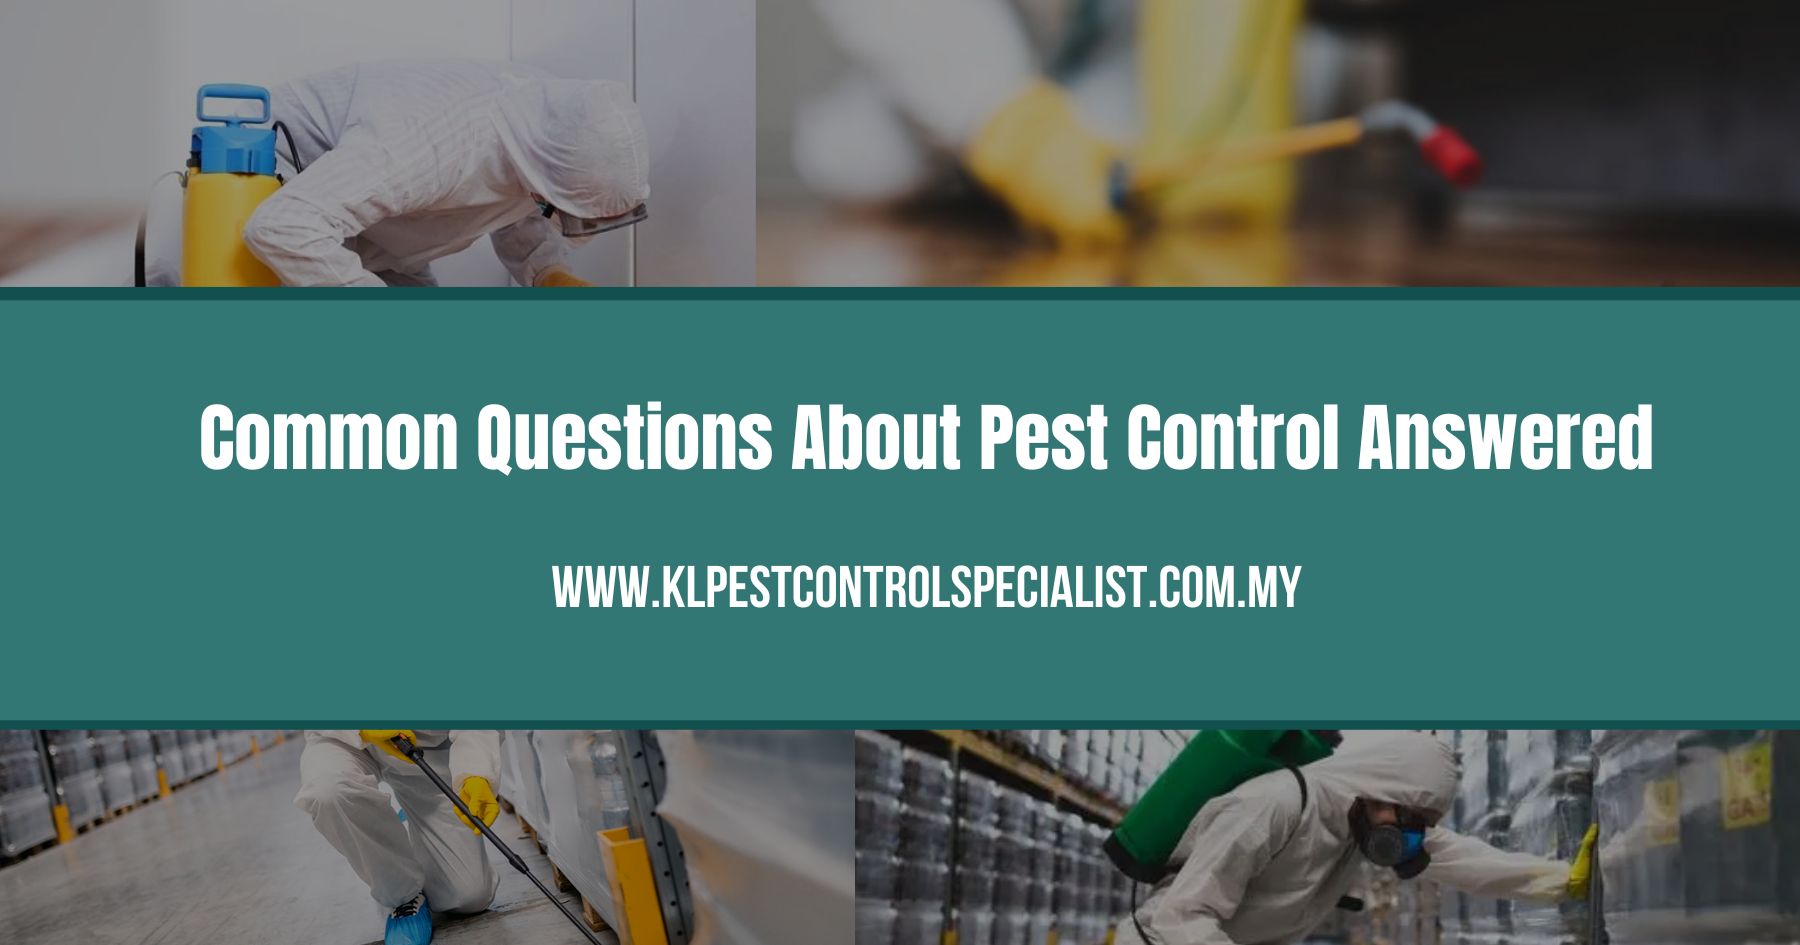 Common Questions About Pest Control Answered